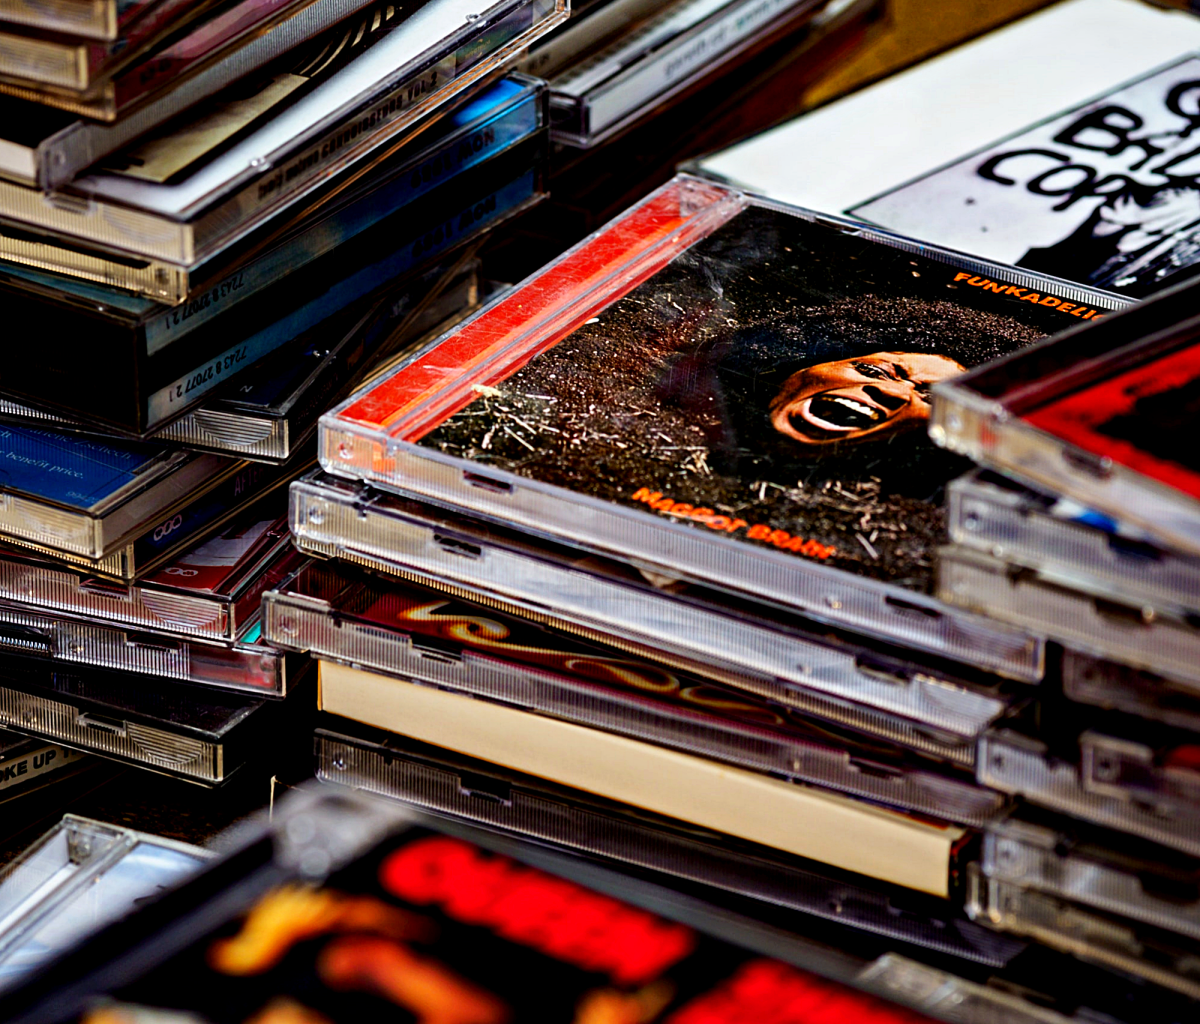 You can't stream CDs, but at least you own the music.